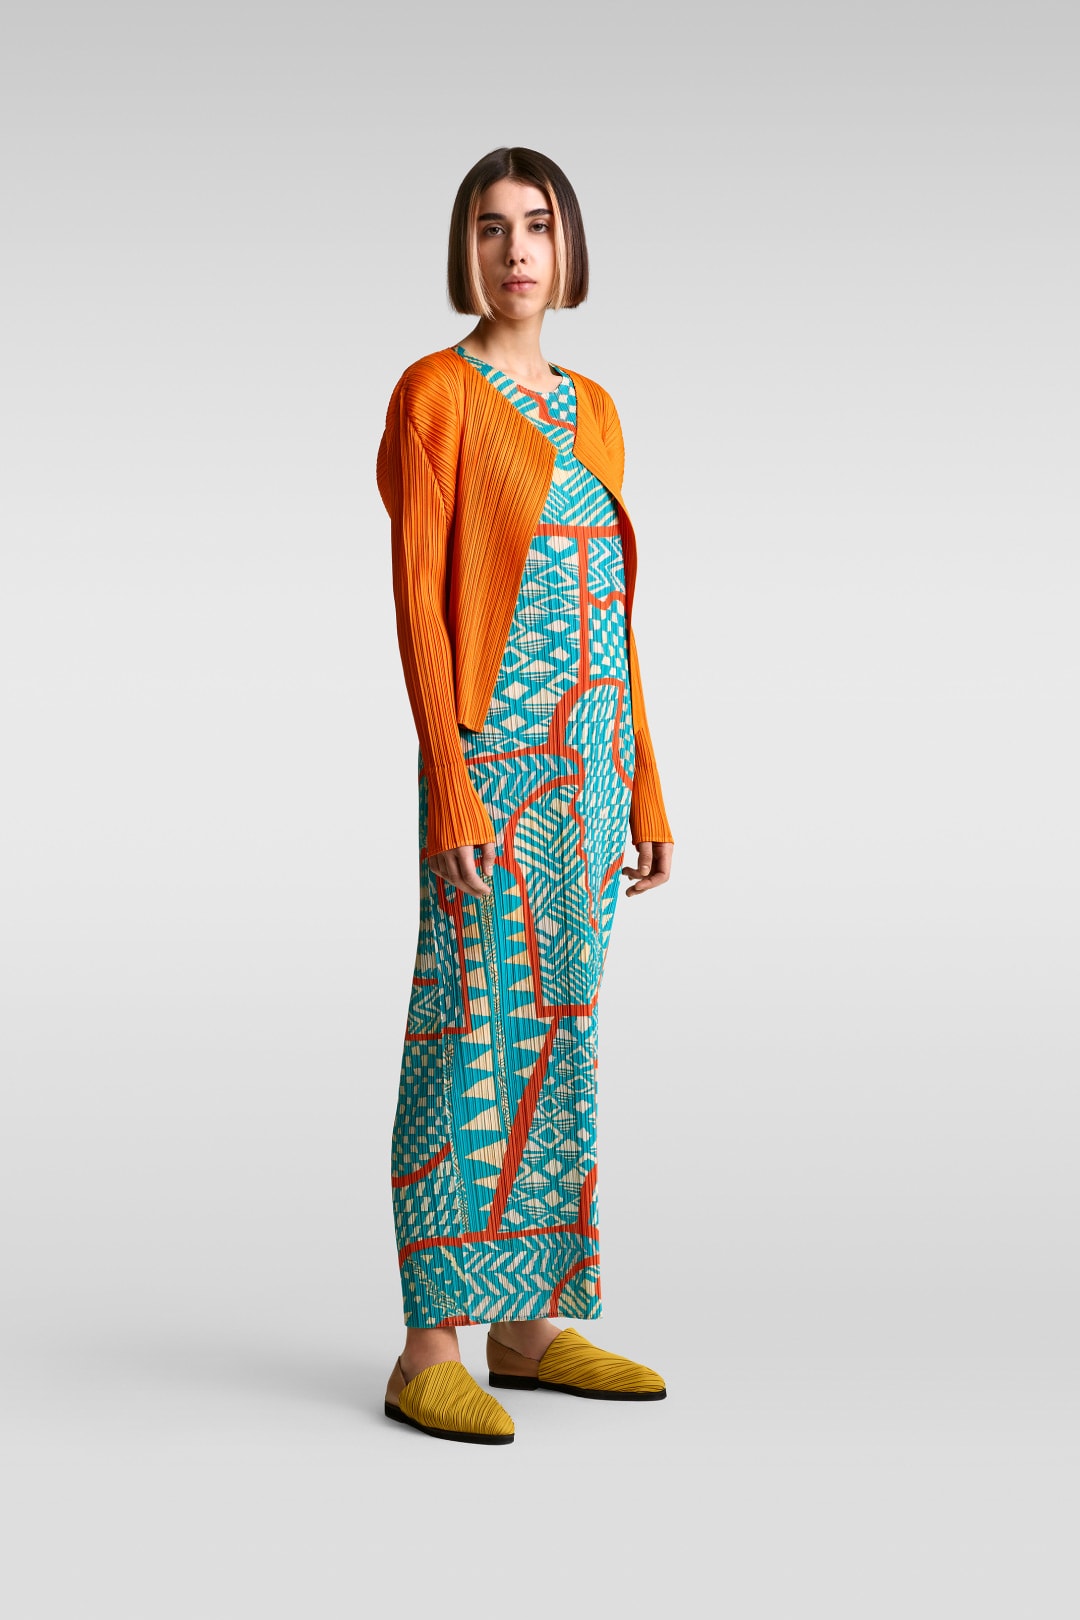 issey miyake new pleats please collection colorful pieces silhouettes cheers series monthly colors series sunset series pants dresses tops tunics